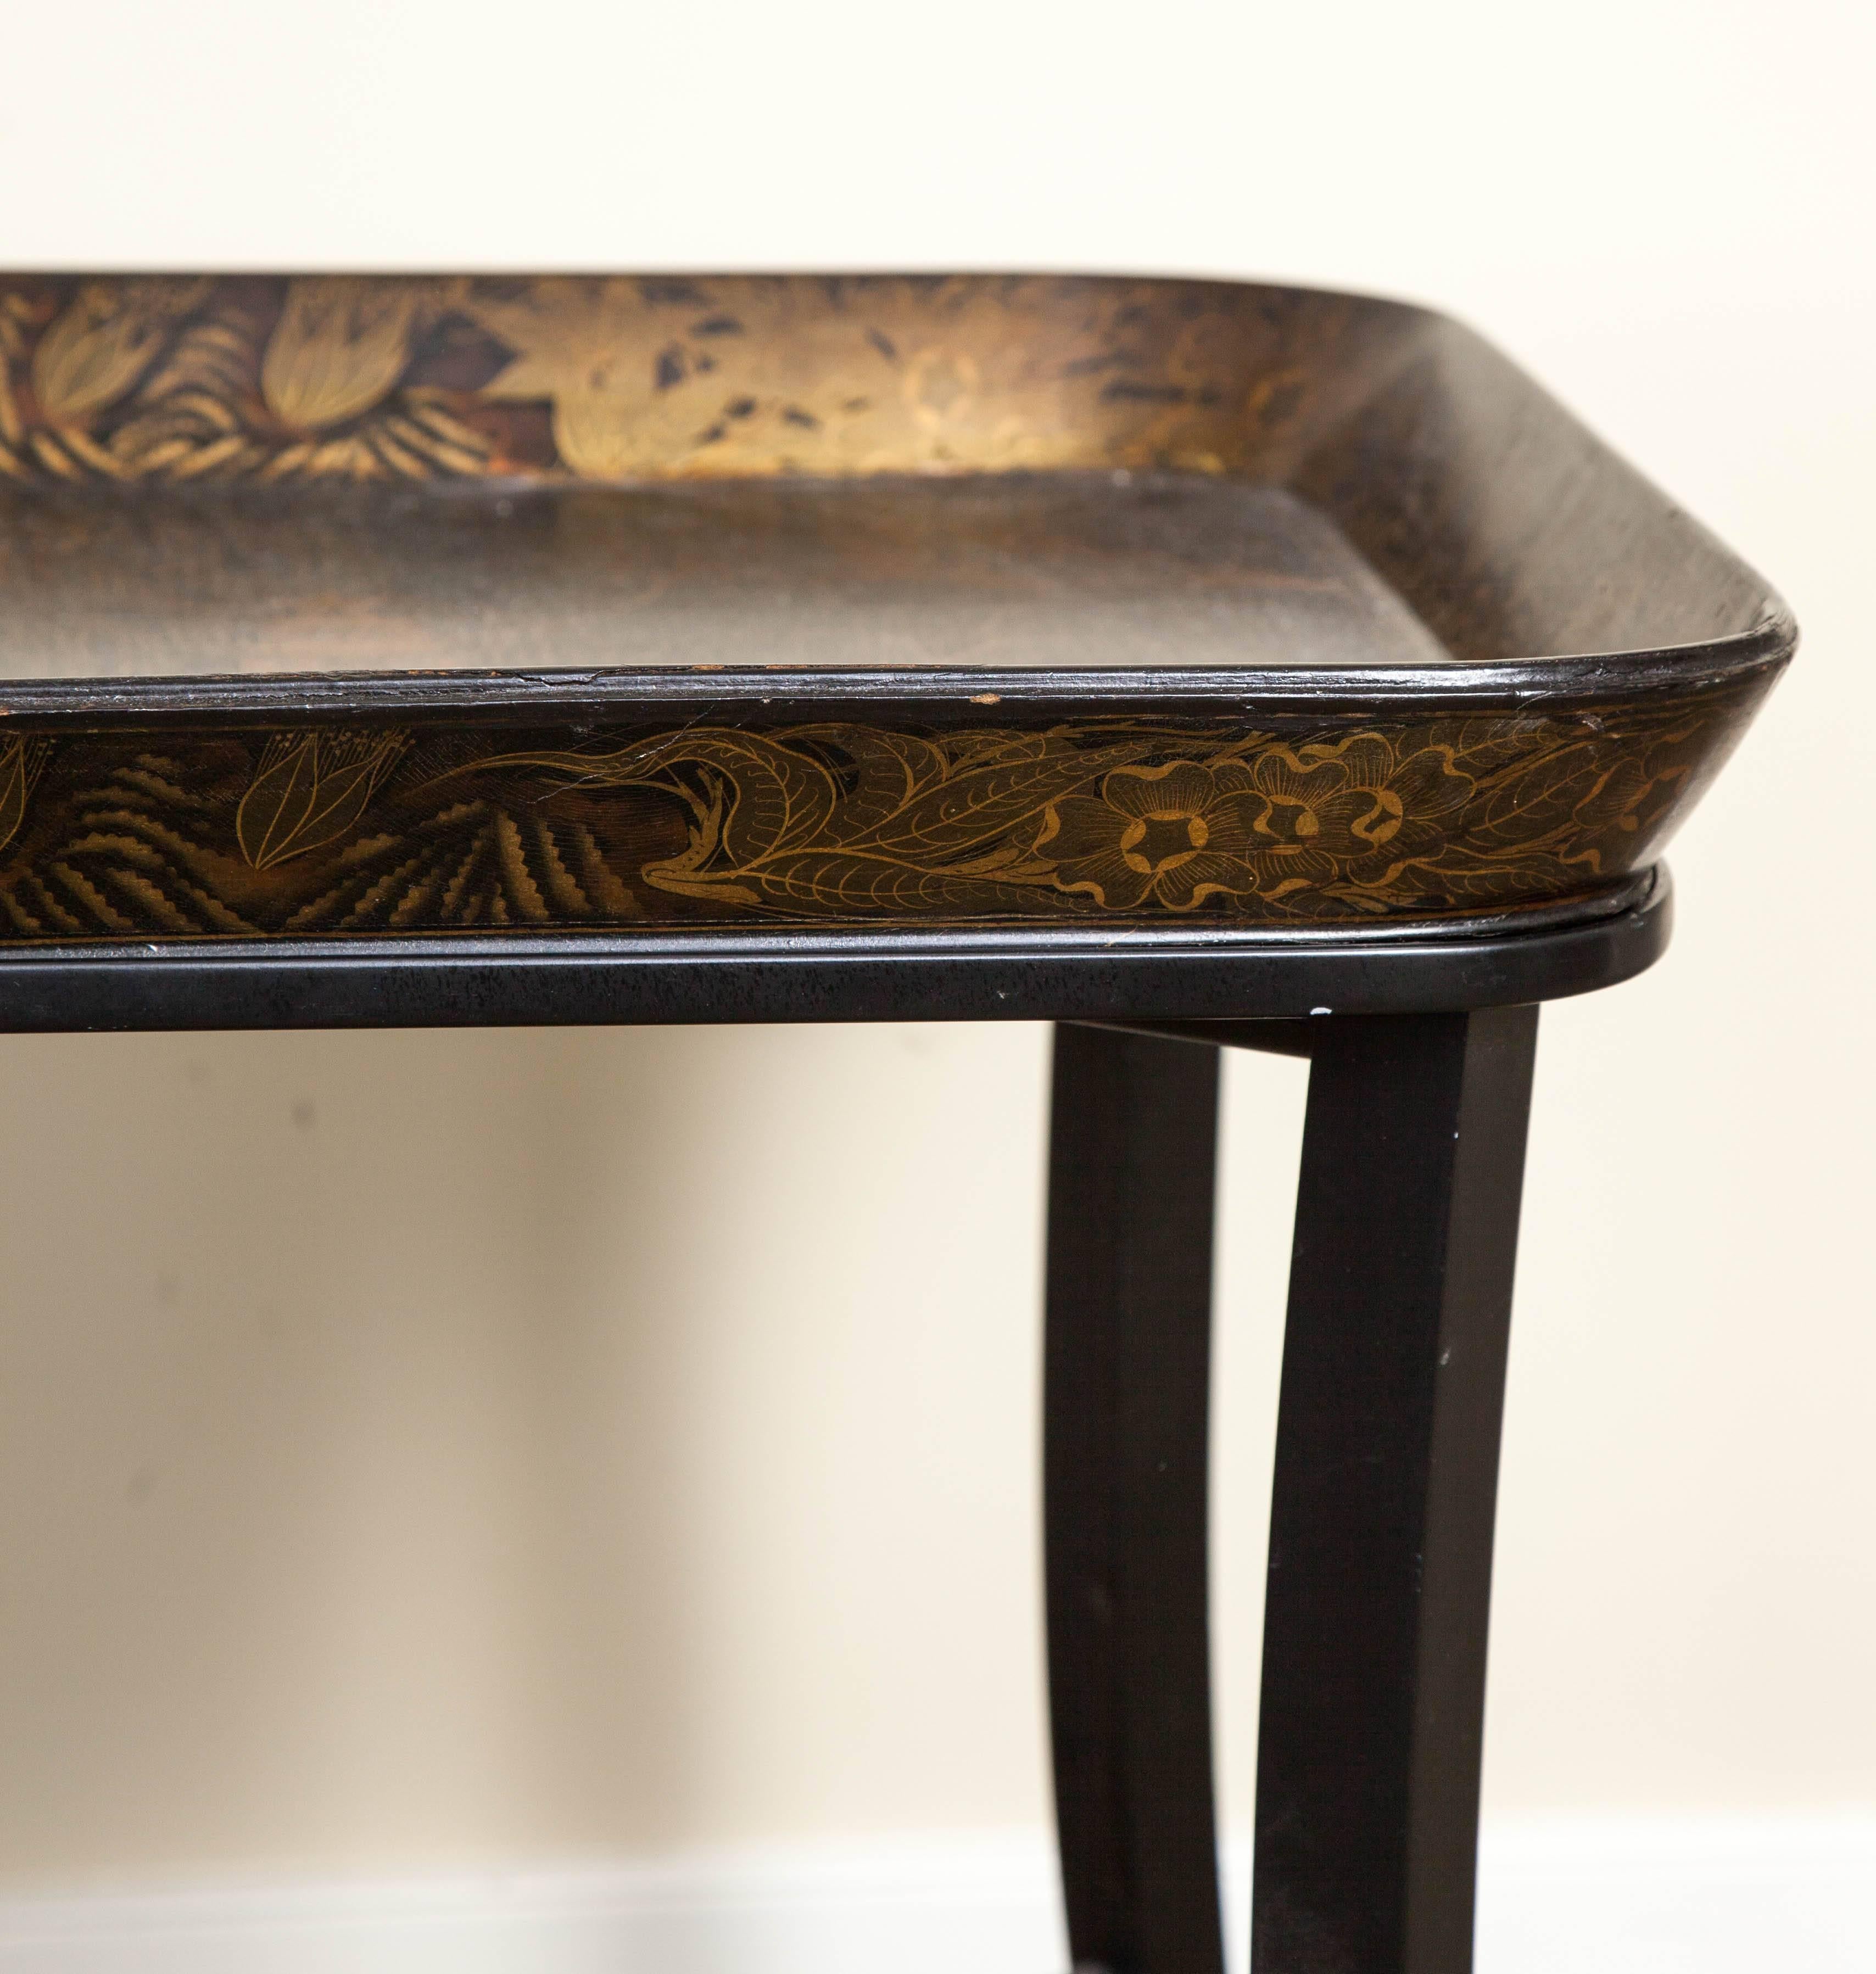 Regency Black and Gilt Papier Mache Lacquer Tray with Later Stand, 19th Century For Sale 3